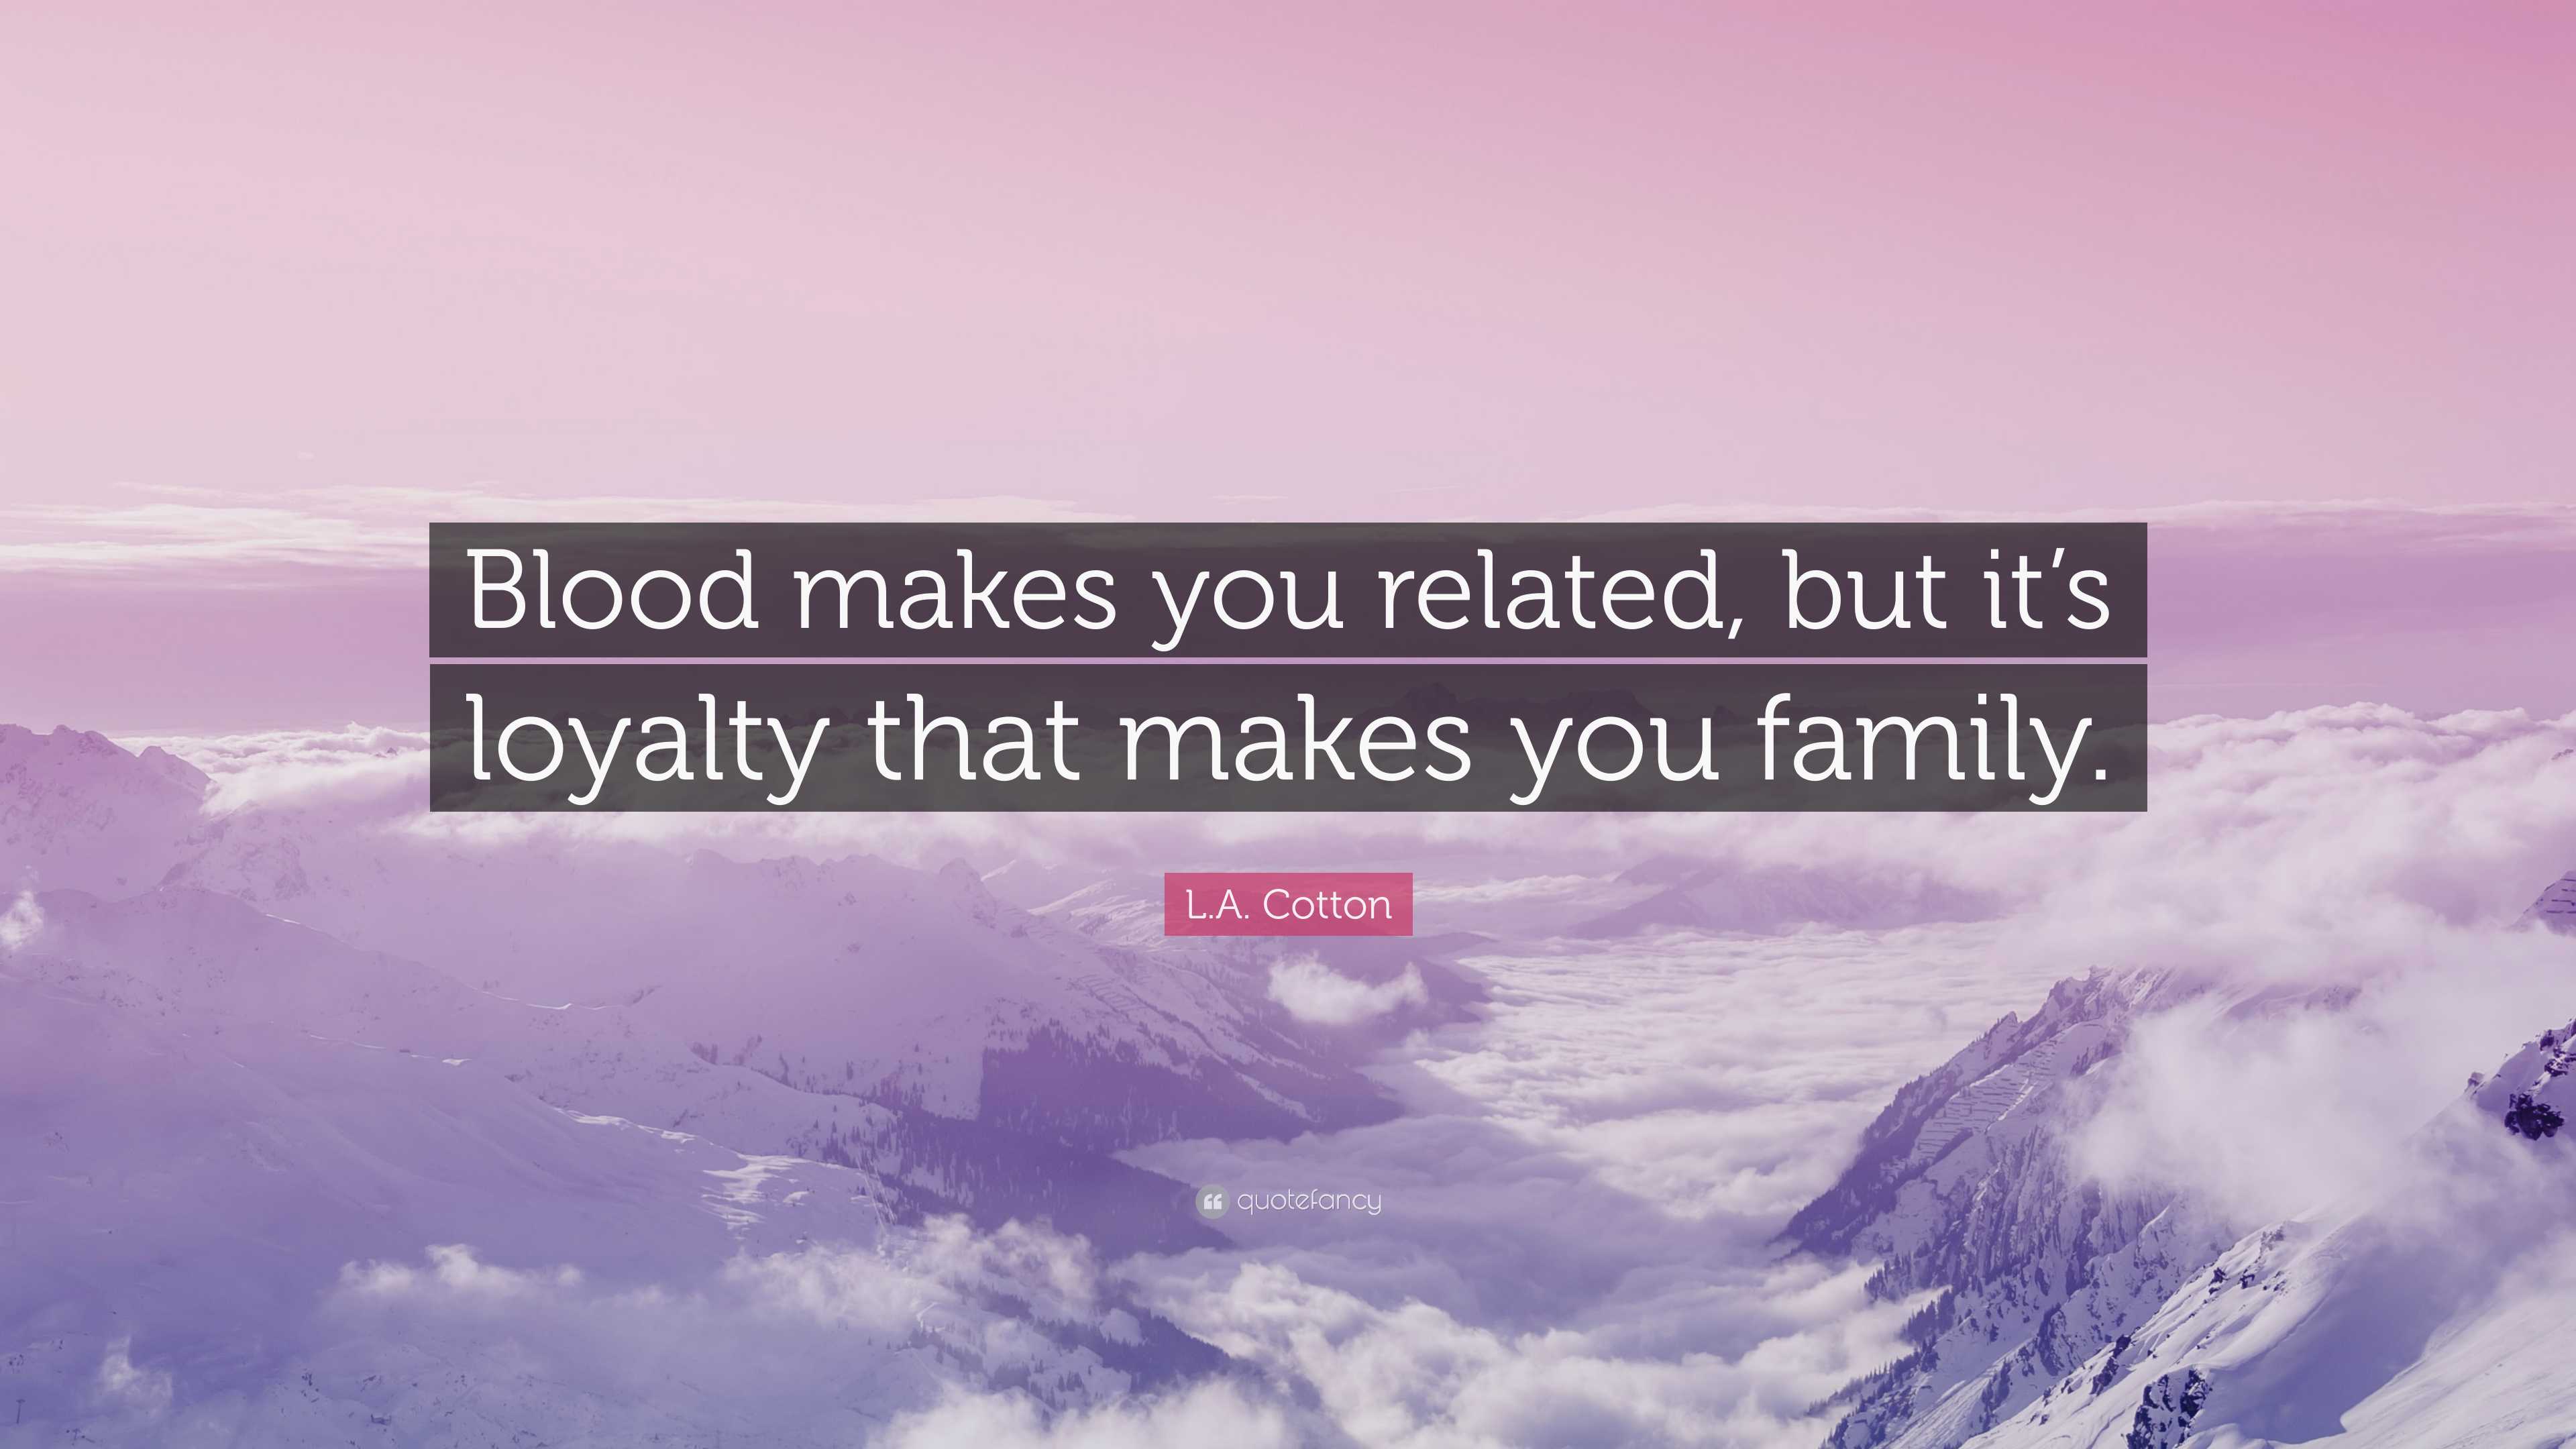 L.A. Cotton Quote: “Blood makes you related, but it's loyalty that